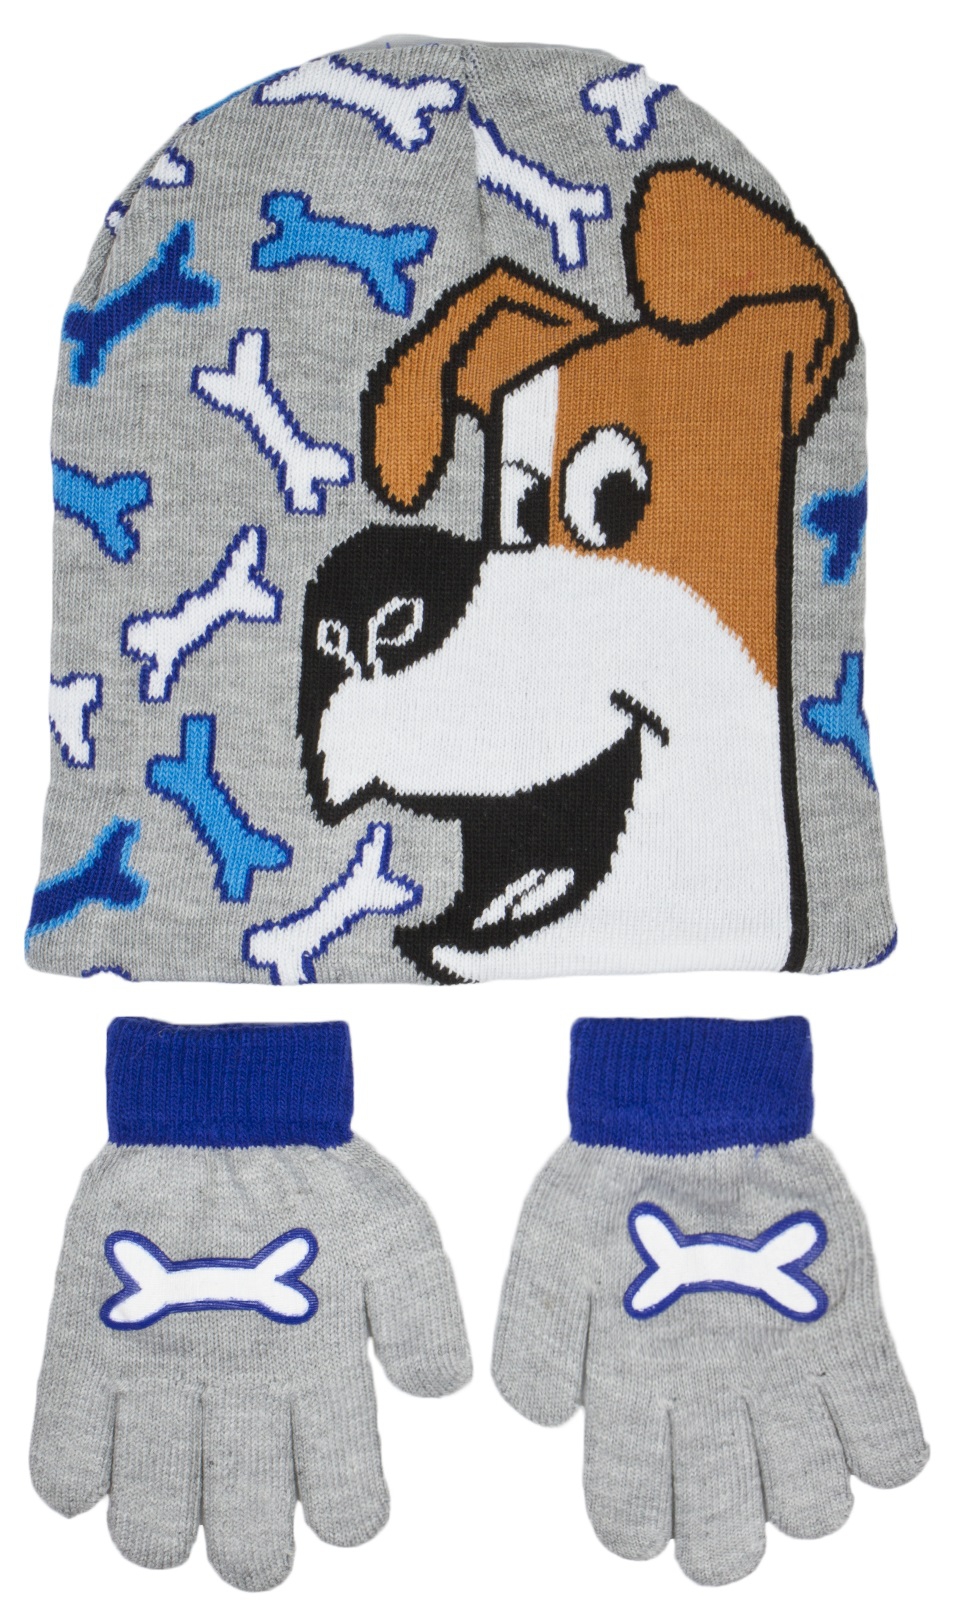 The Secret Life of Pets Boys 'Max' 2 Piece Winter Set Hat & Glove One Size Kids Accessories